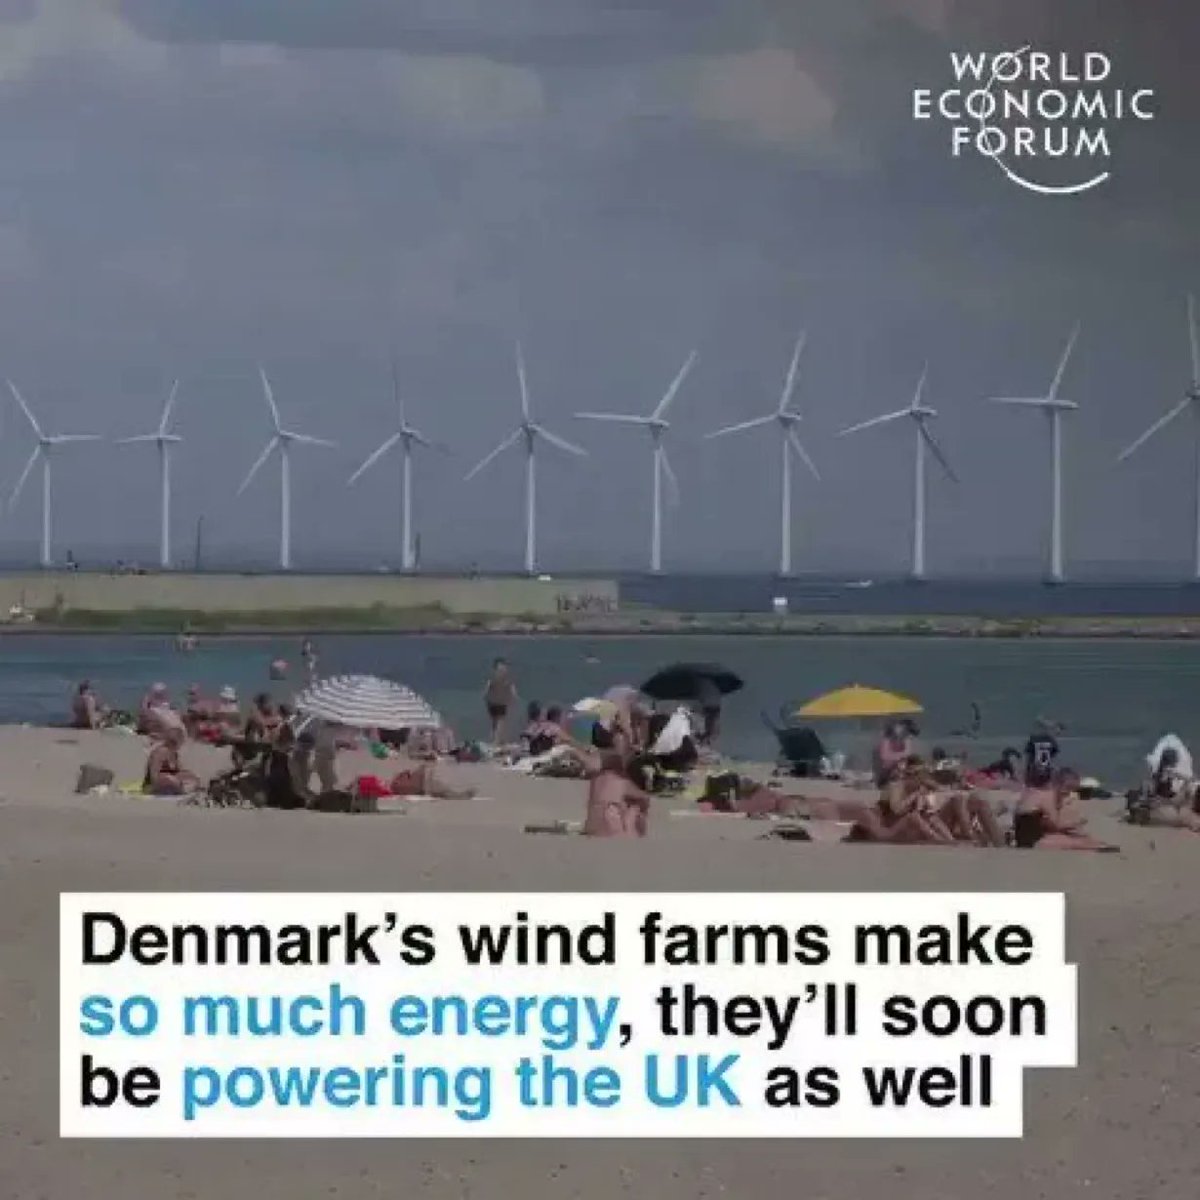 Denmark 🇩🇰 is producing so much windenergy it may soon be powering the U.K. as well. Time to speed it up everywhere in 2023!